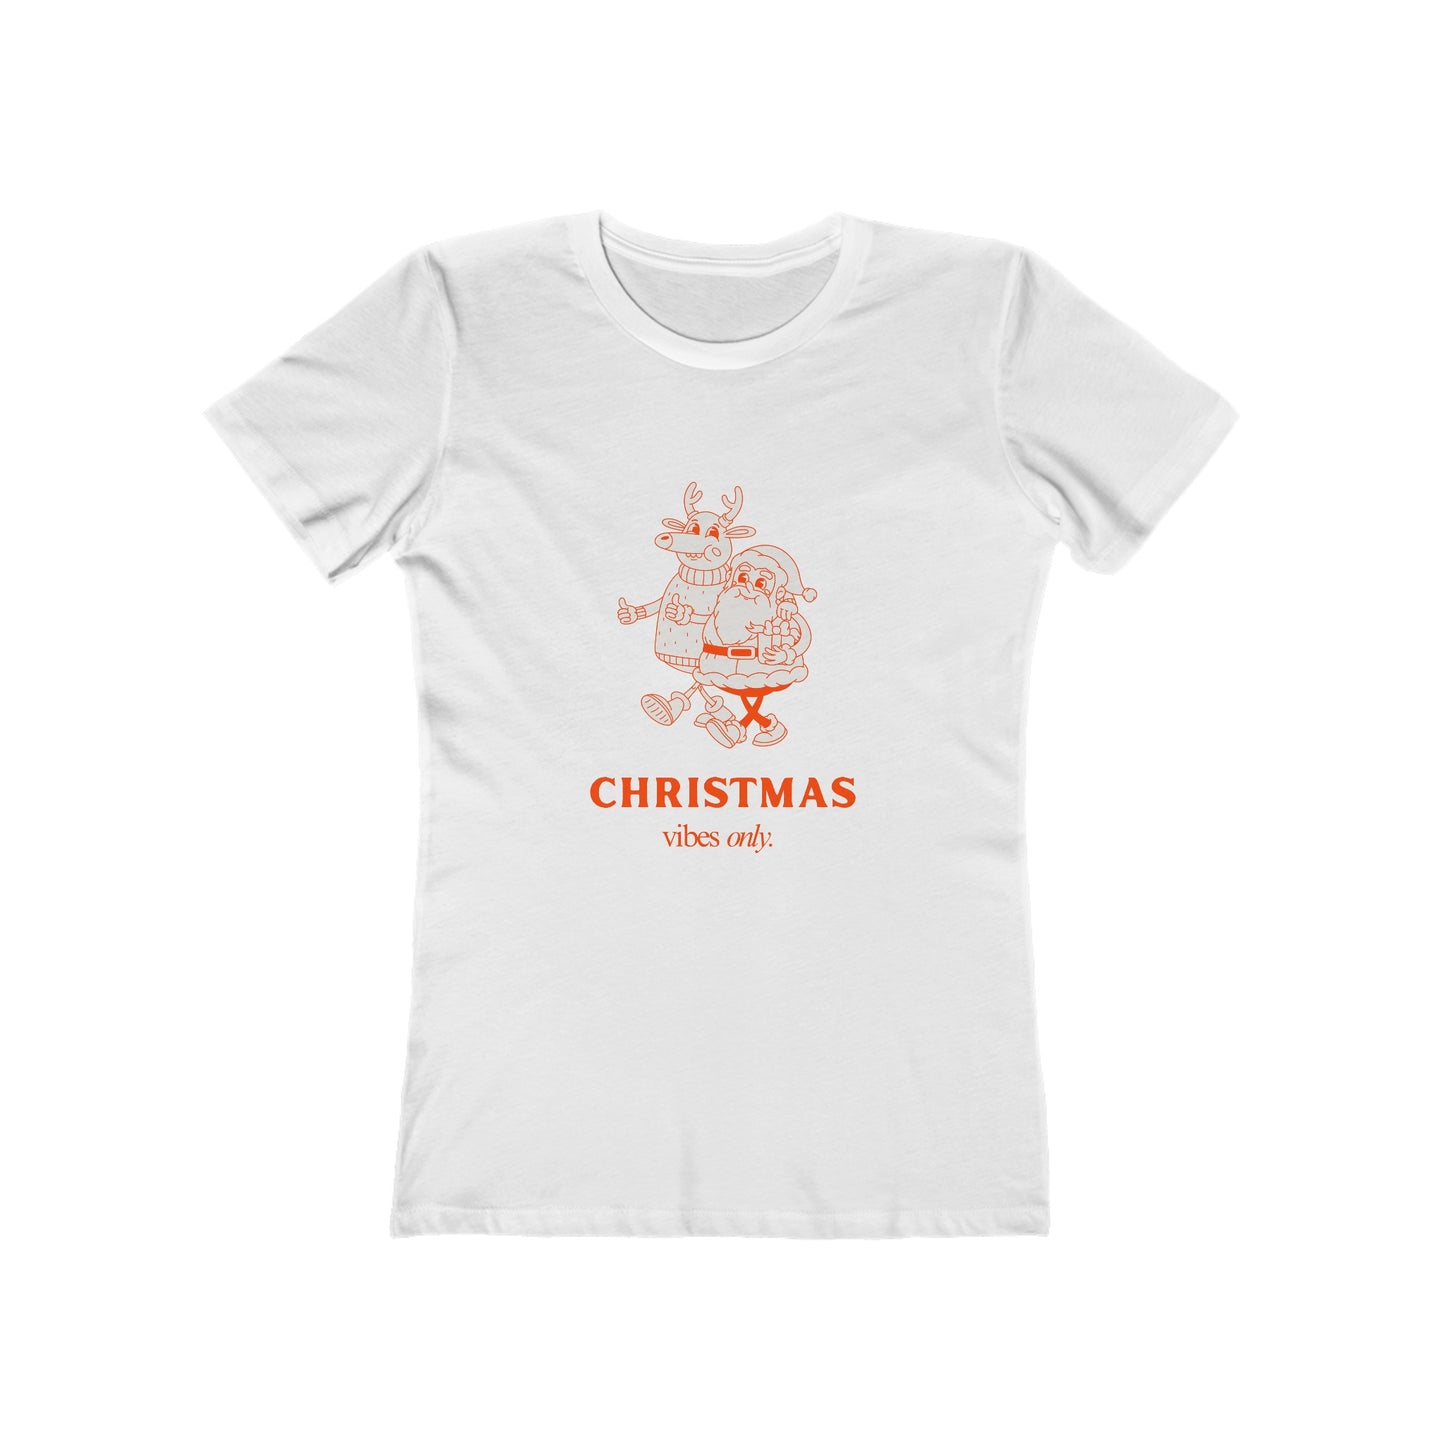 Christmas Vibes Only, Women's The Boyfriend Tee